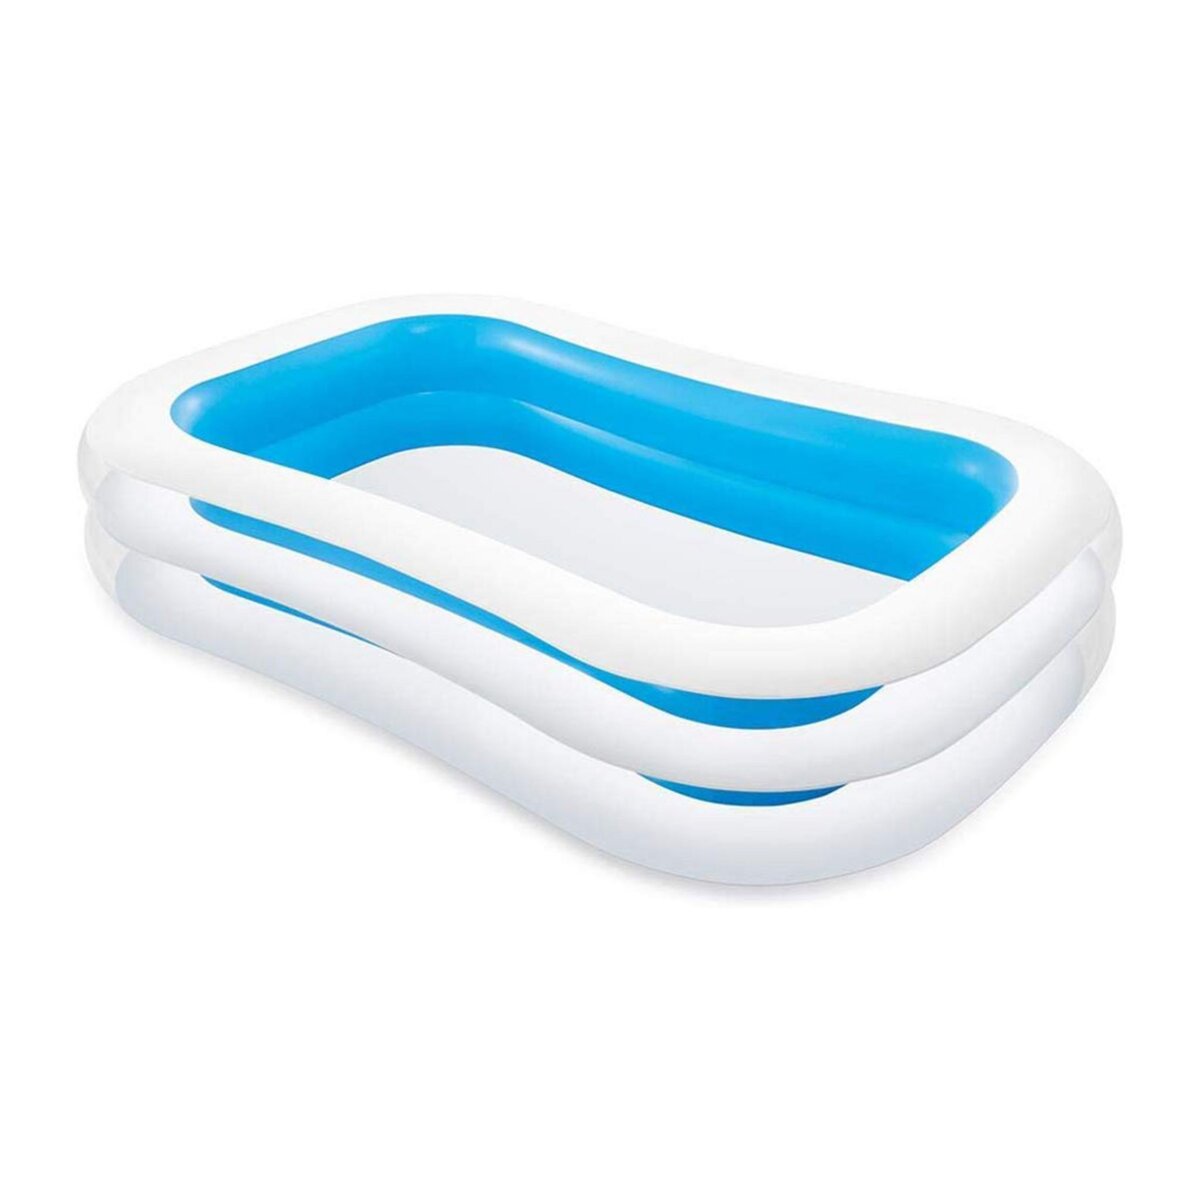 INTEX Piscine gonflable rectangulaire Family - Intex